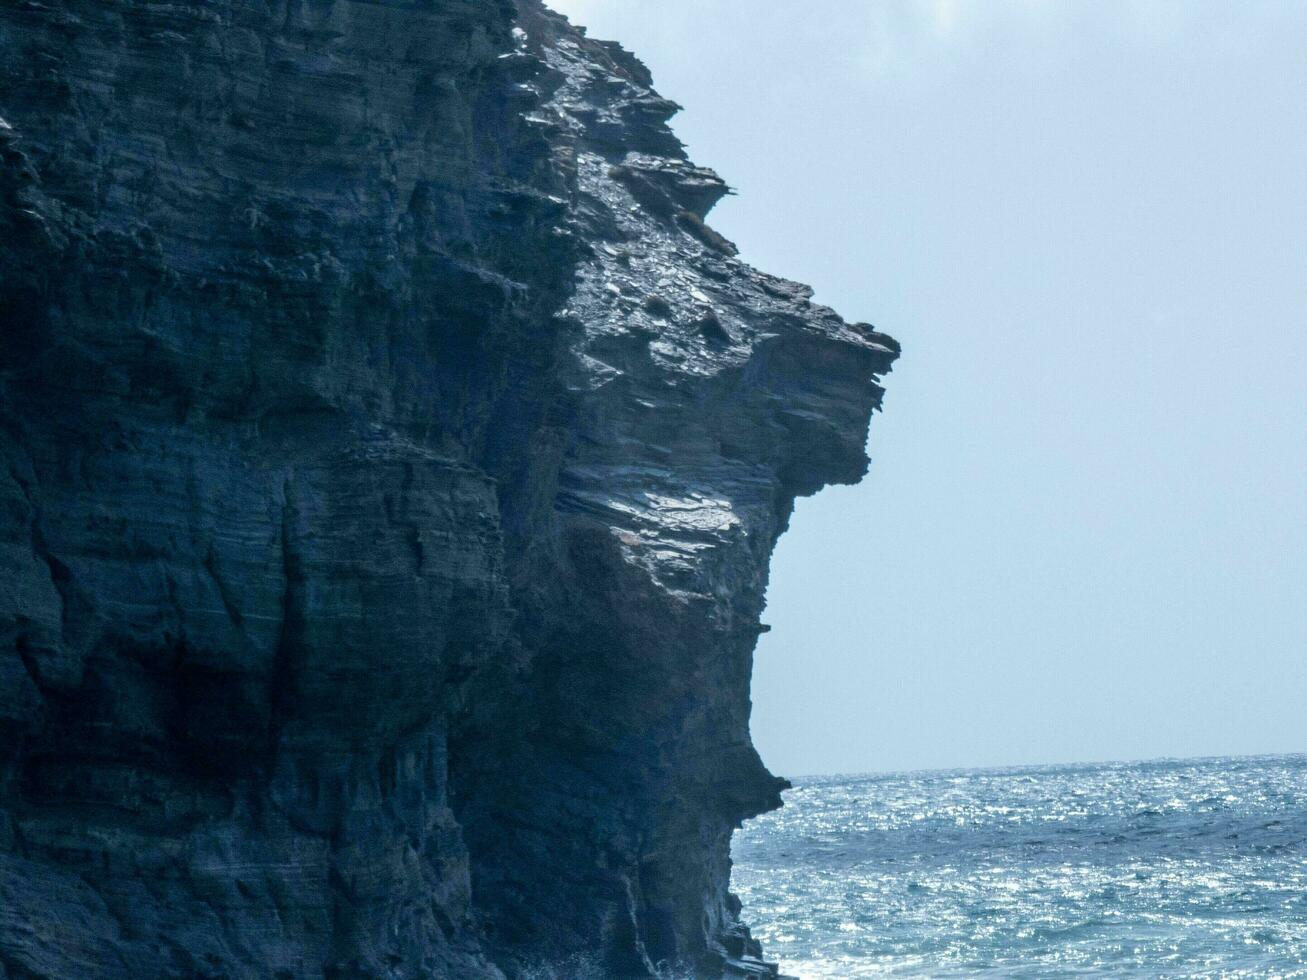 Rock formation resembling a human profile against the ocean background. photo